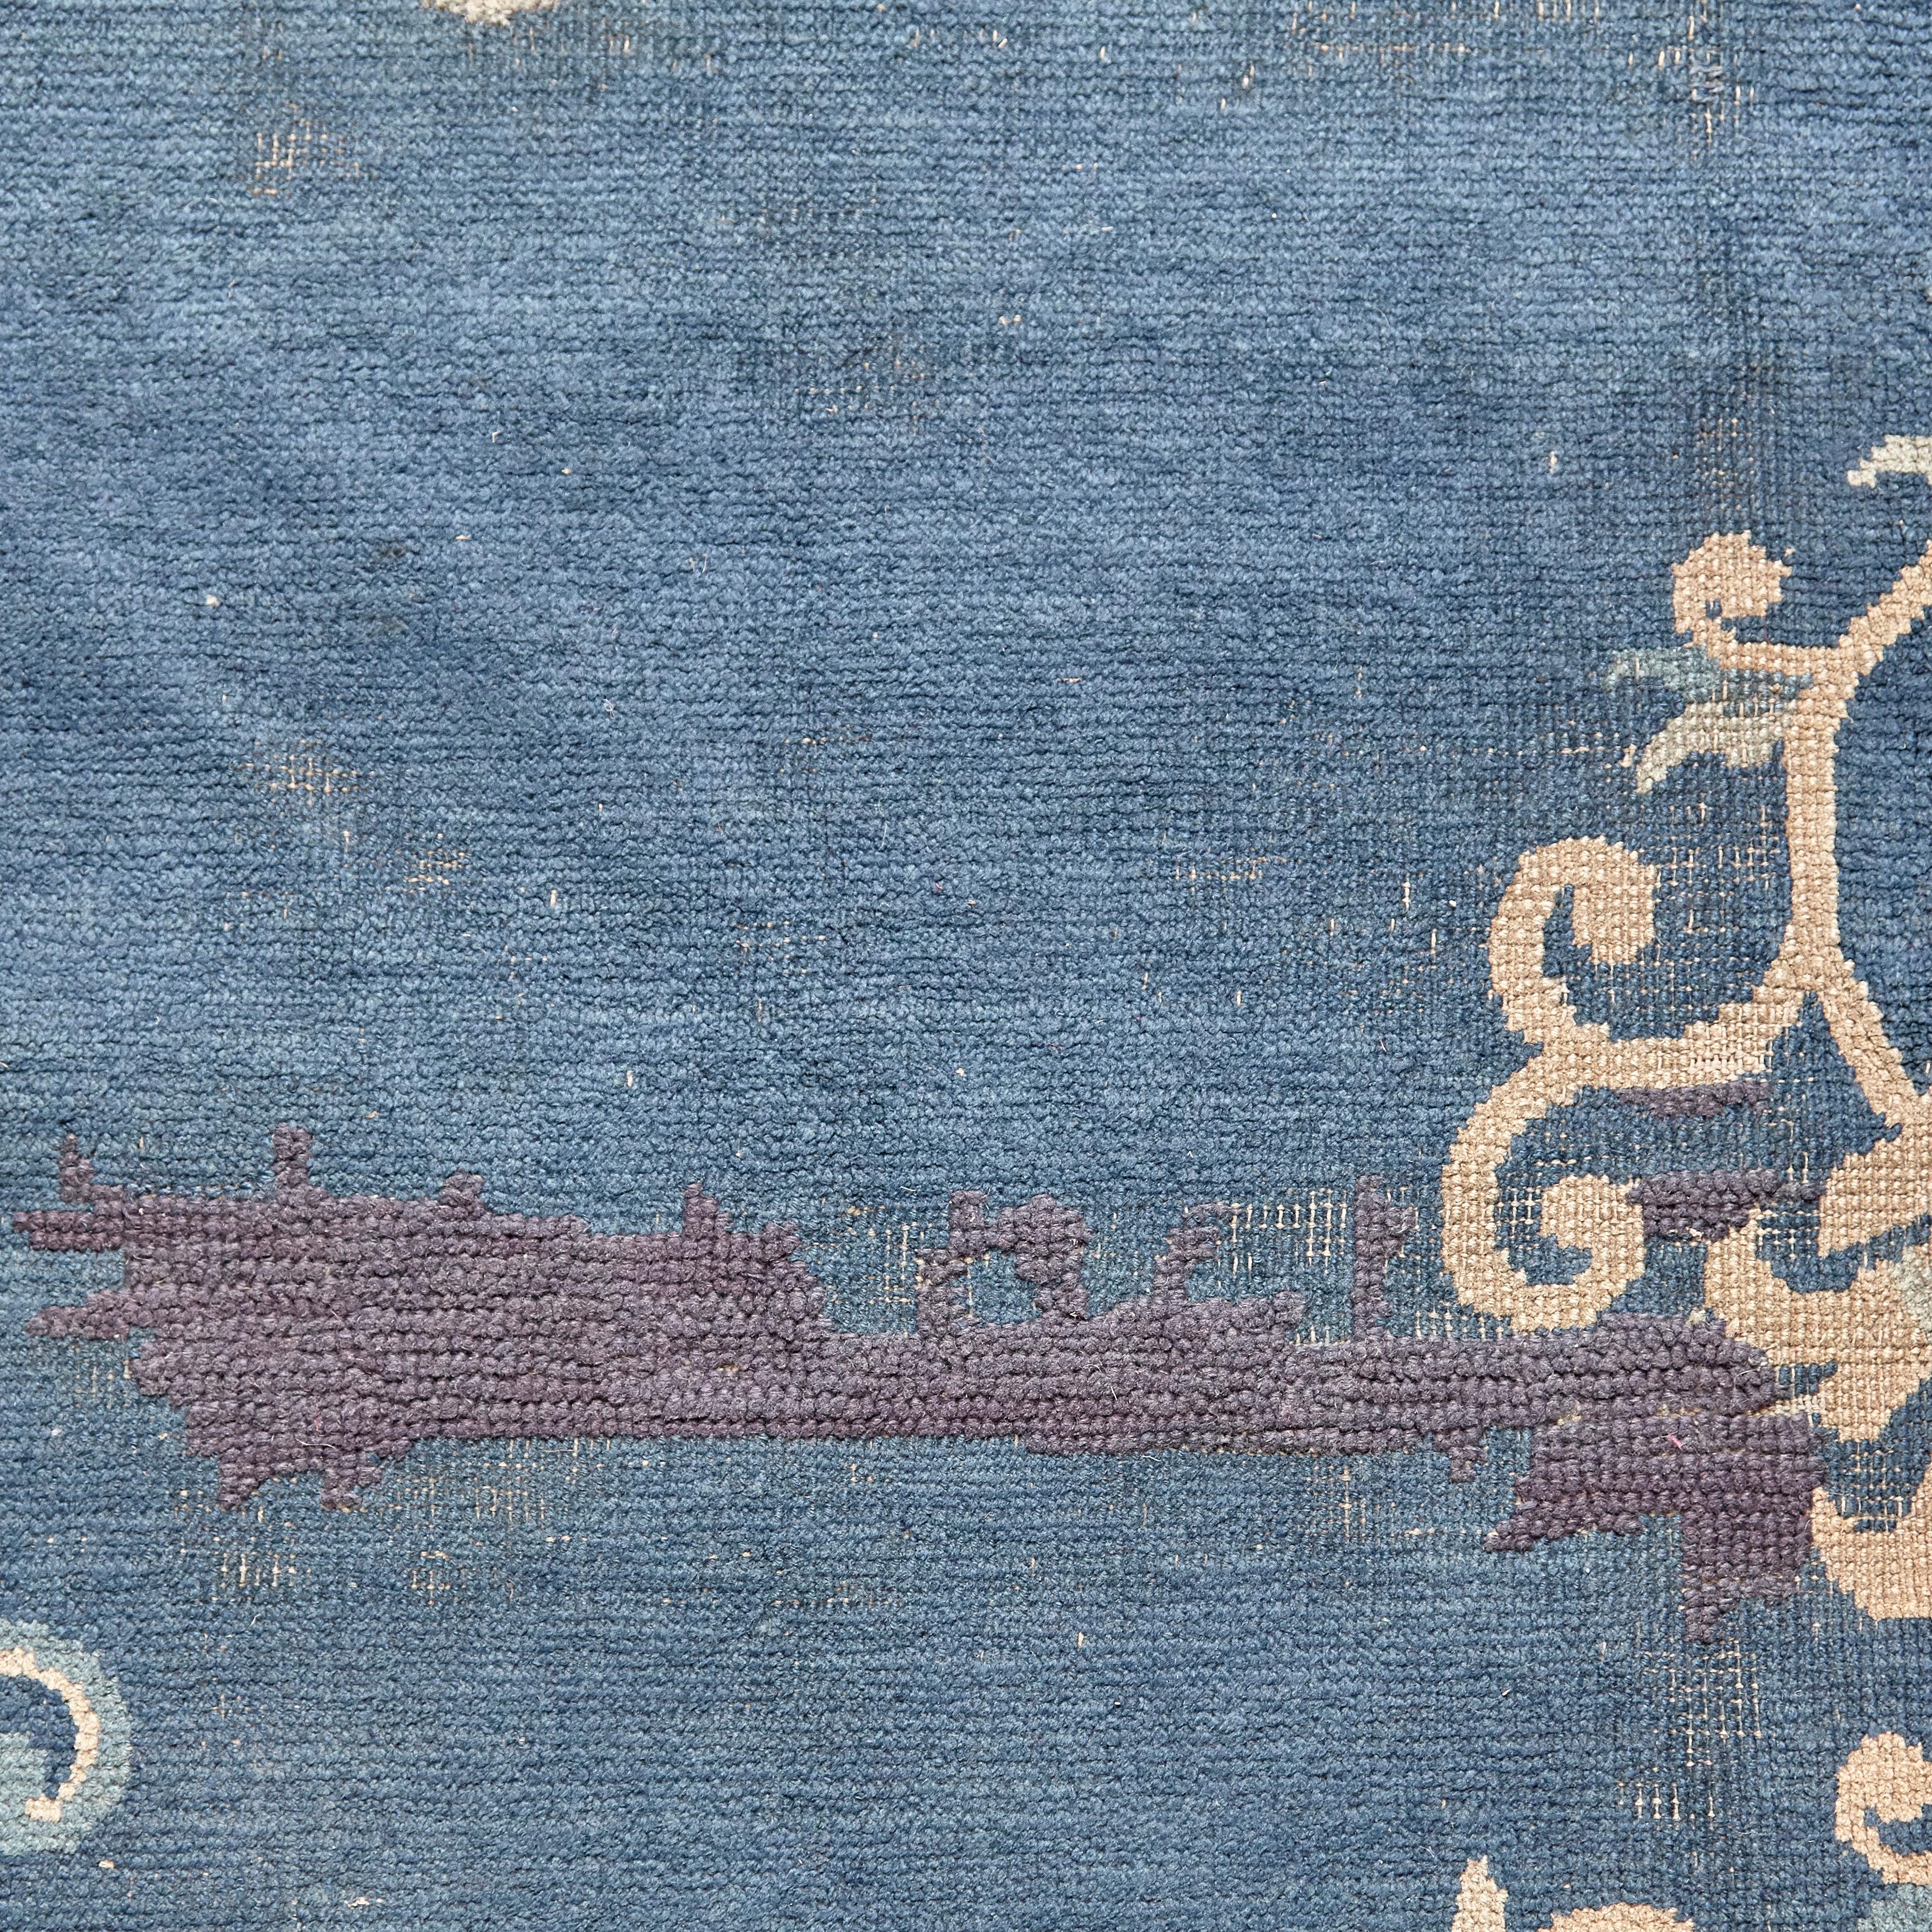 Ningshia, Chinese Export, Hand Knotted Wool, Antique Rug, circa 1890 12